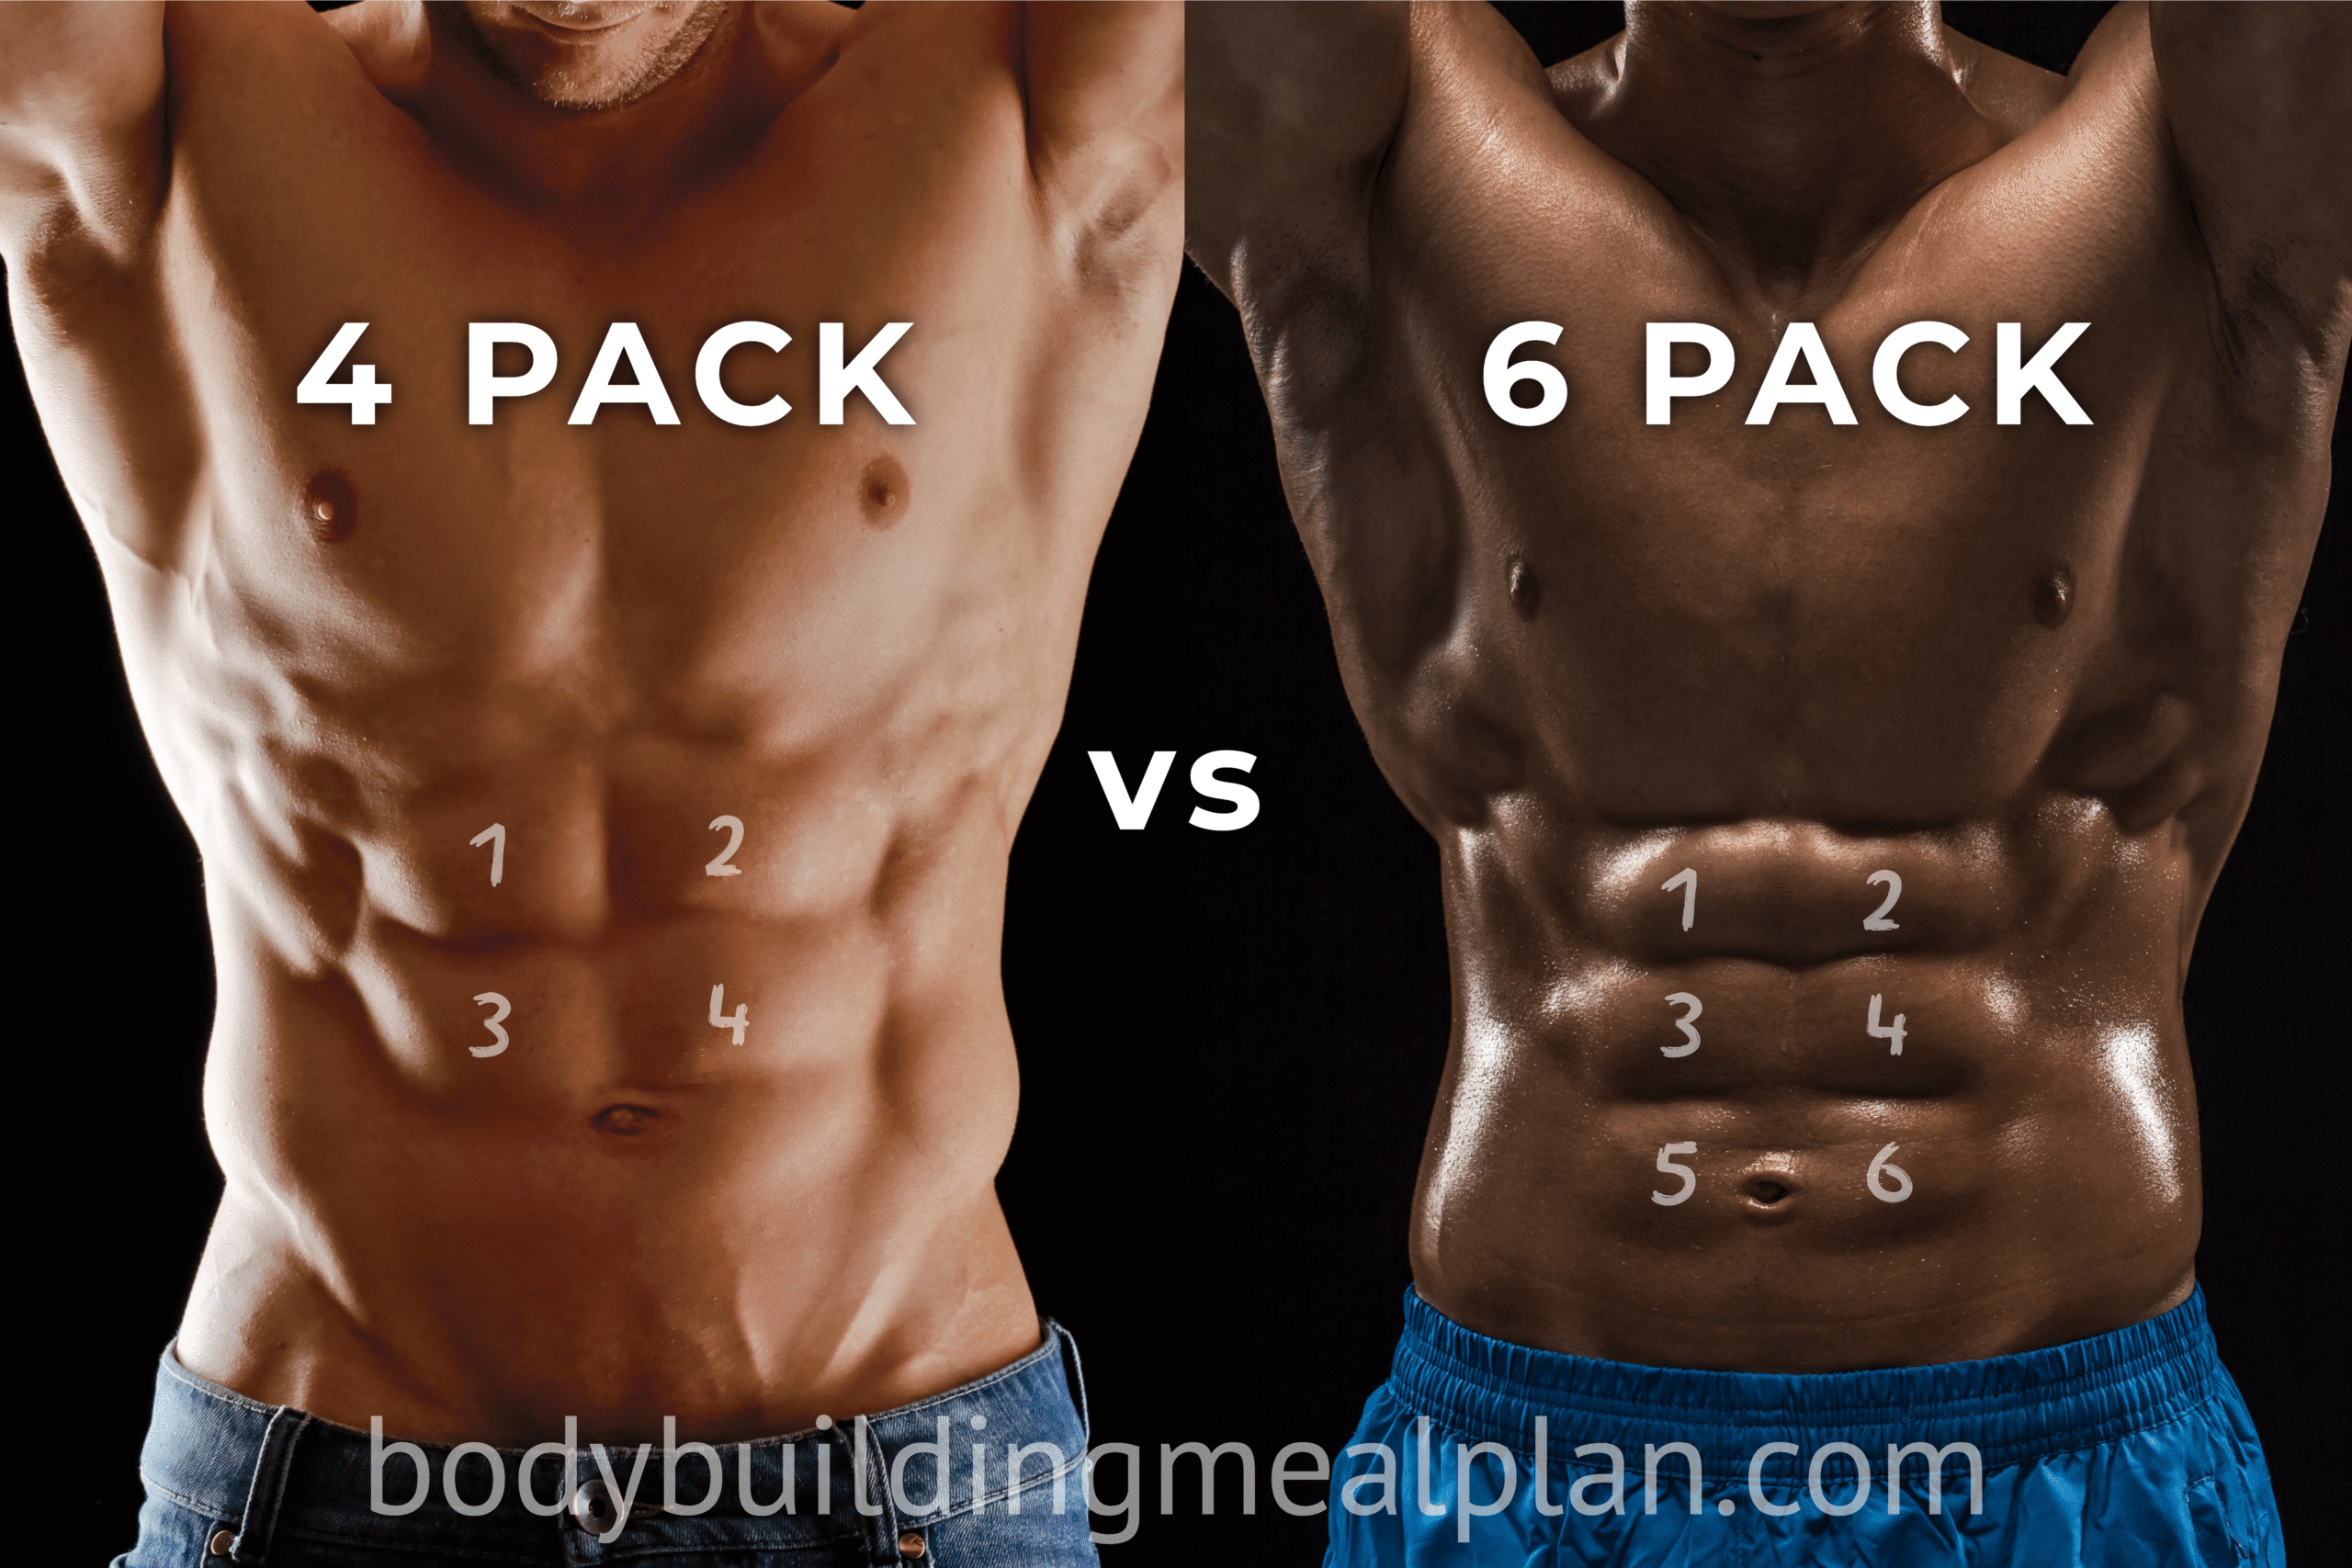 How does your six pack look? - Quora